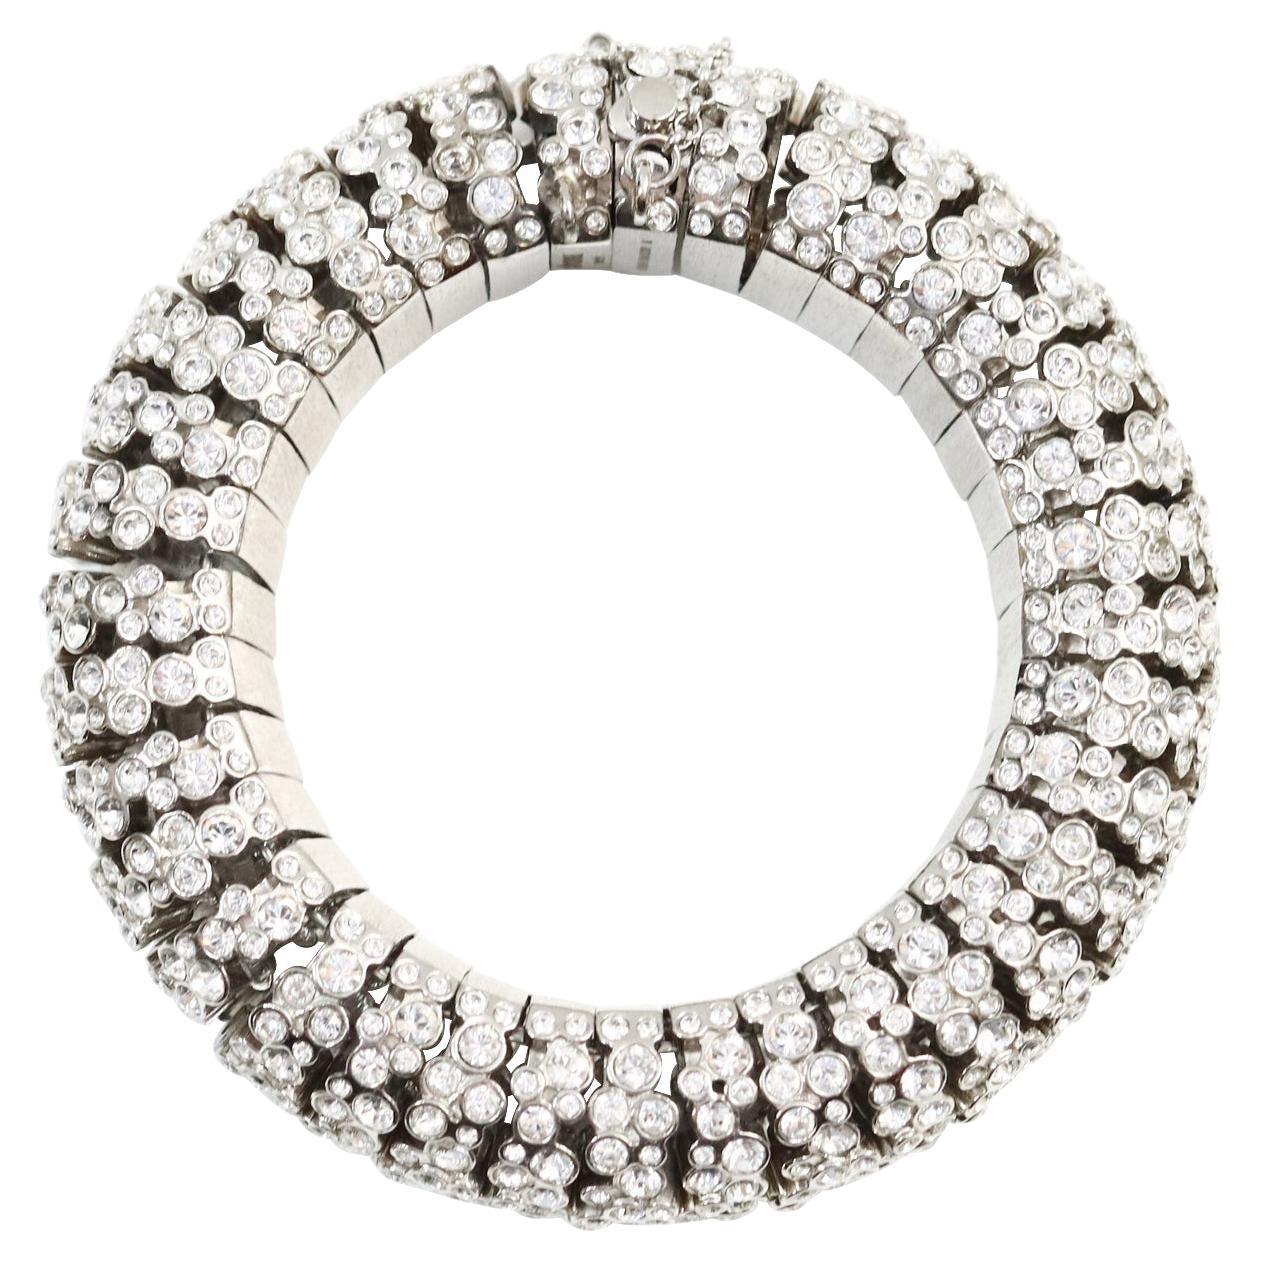 Collectible Celine Diamante Domed Bracelet Circa 2000s.  Now this is what I call a bracelet. It has never been worn and is just magnificent. I would say it is dated around 2009 give or take.  There is a necklace  on site that matches as well. There